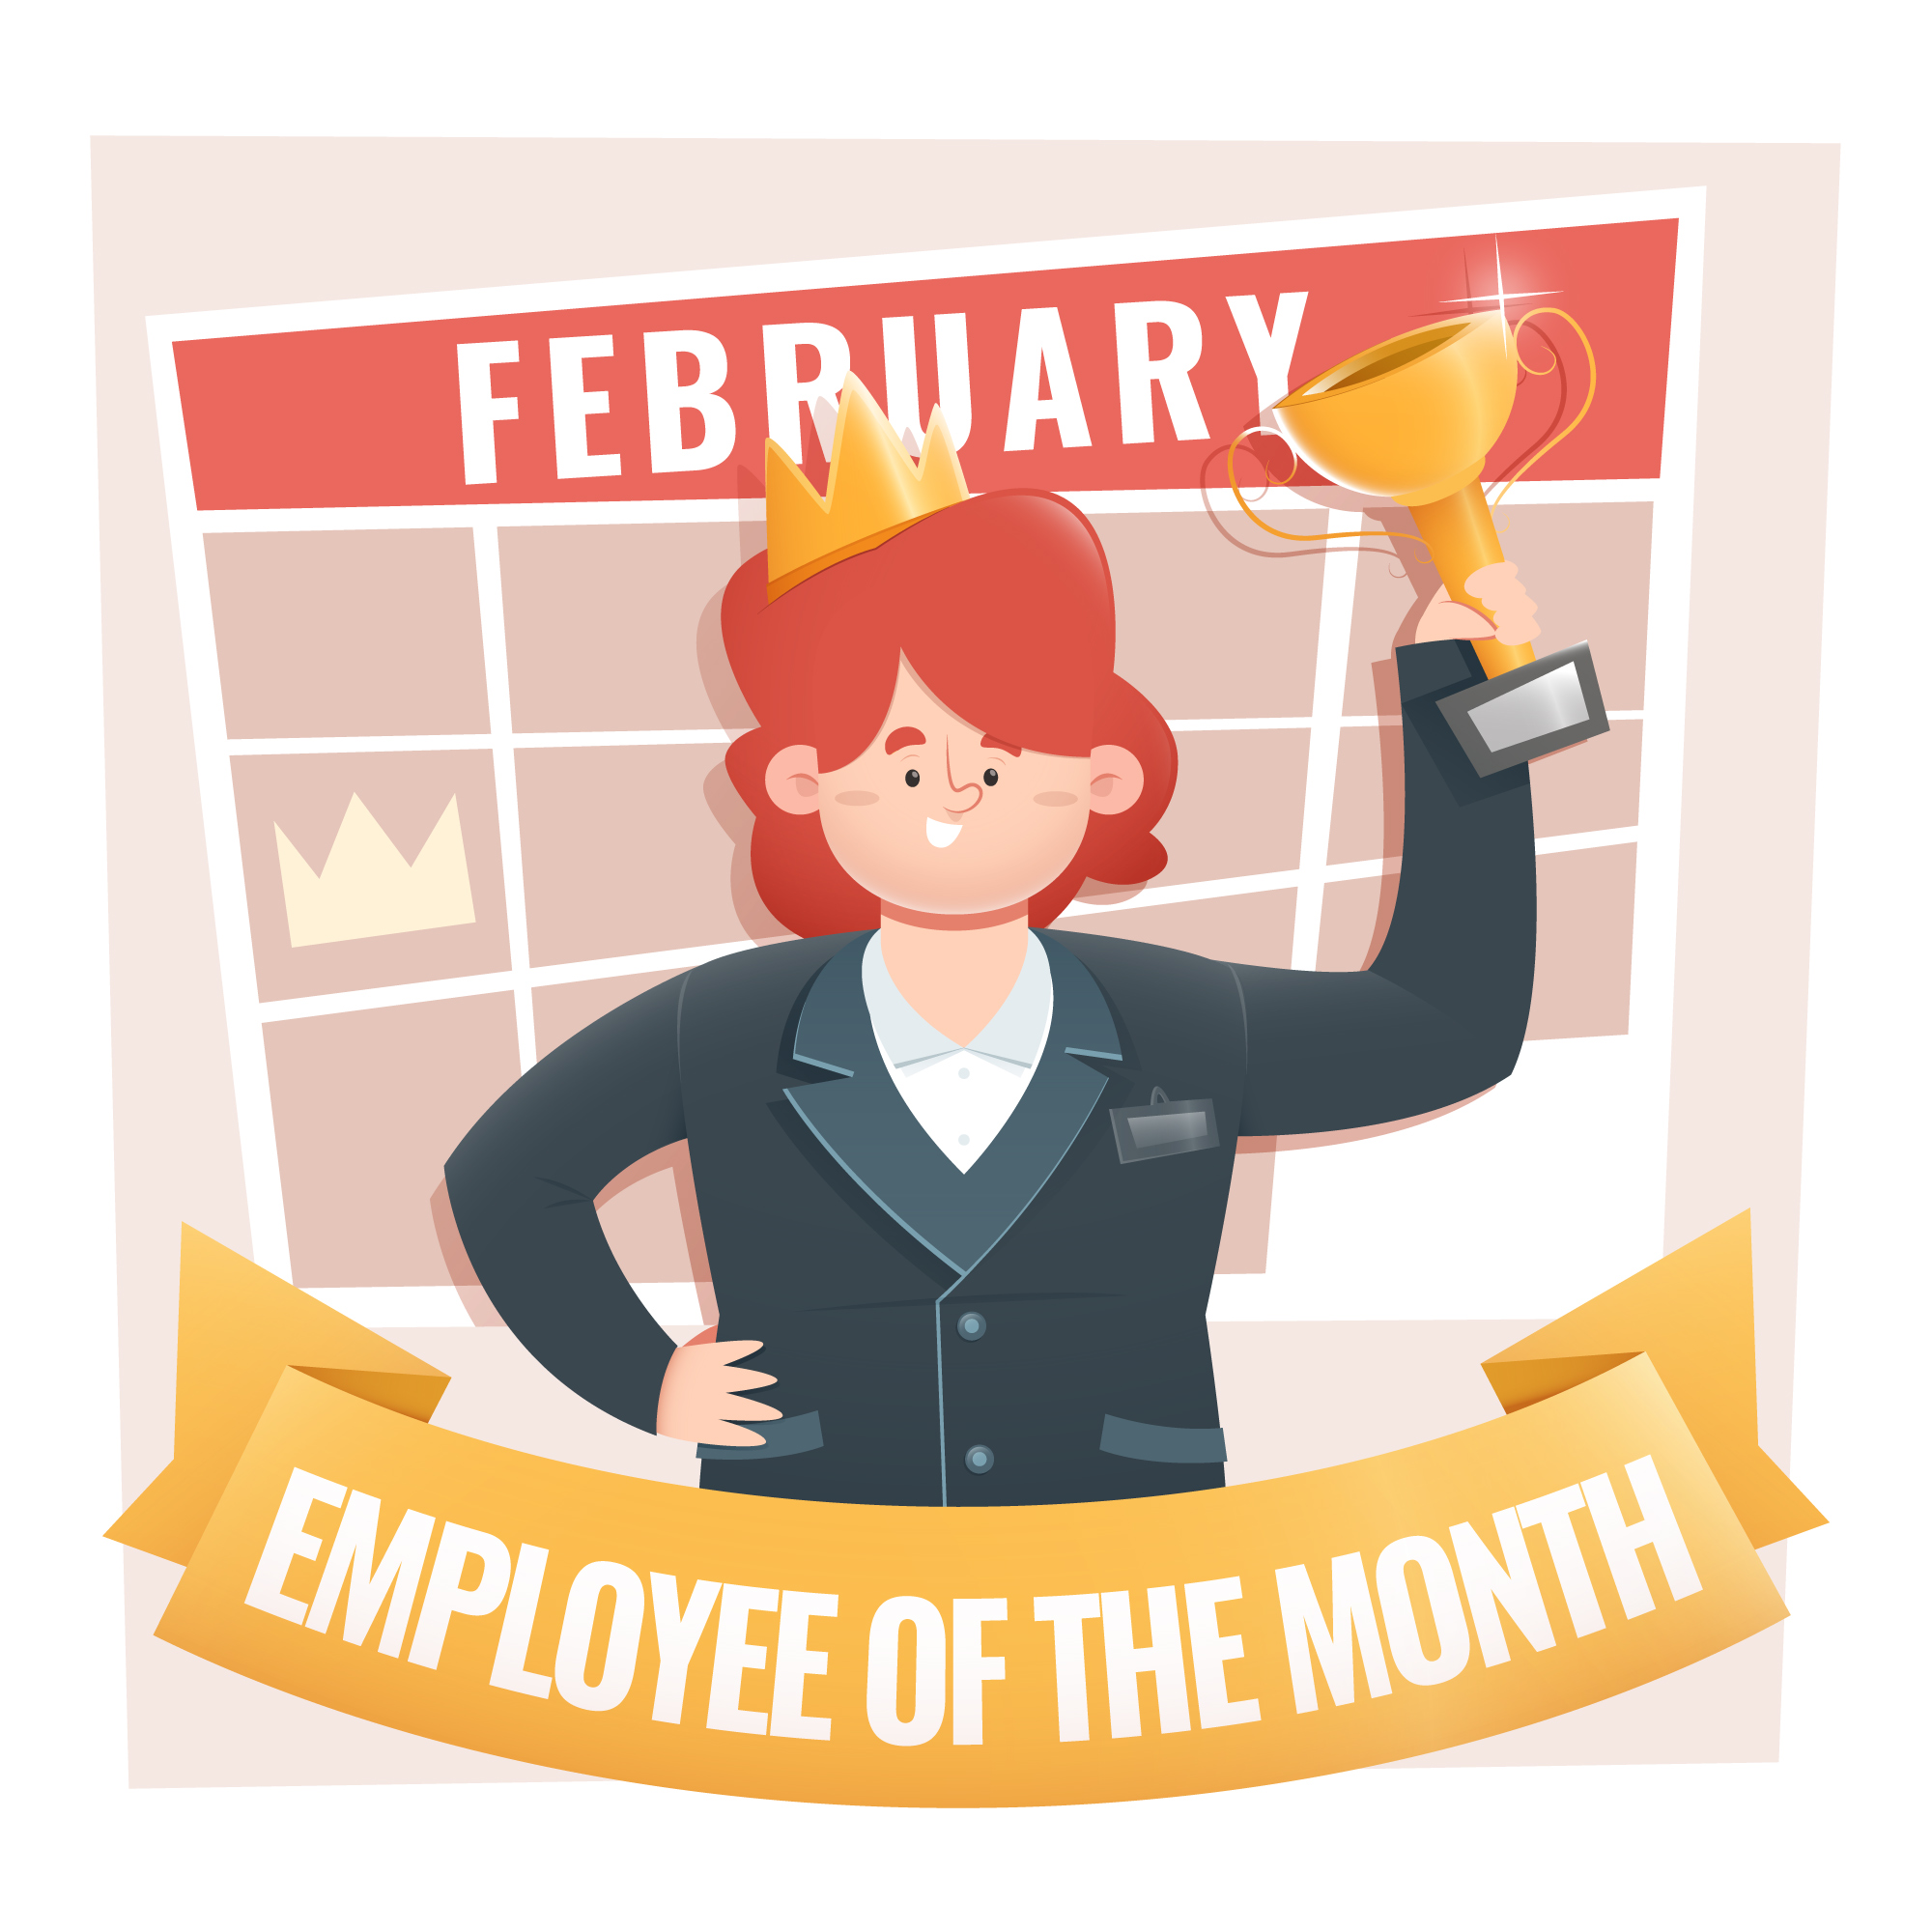 February Employee of the Month!